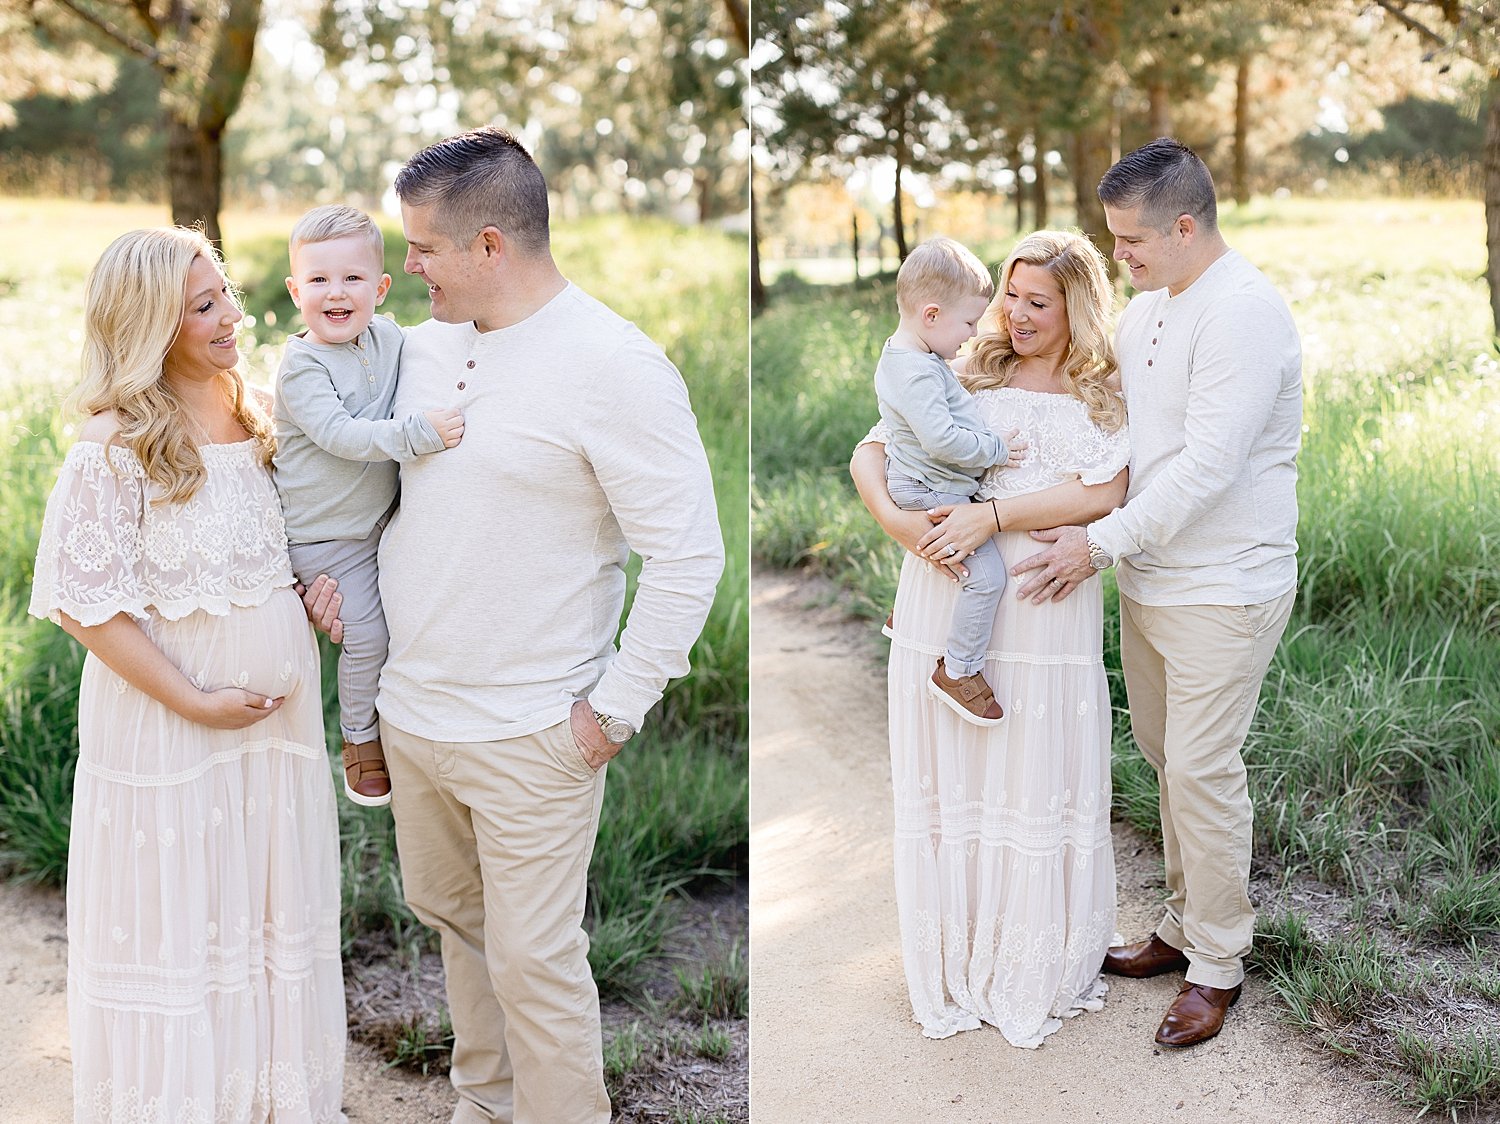 Family maternity session at the Jeffrey Trail in Irvine. Photo by Ambre Williams Photography.